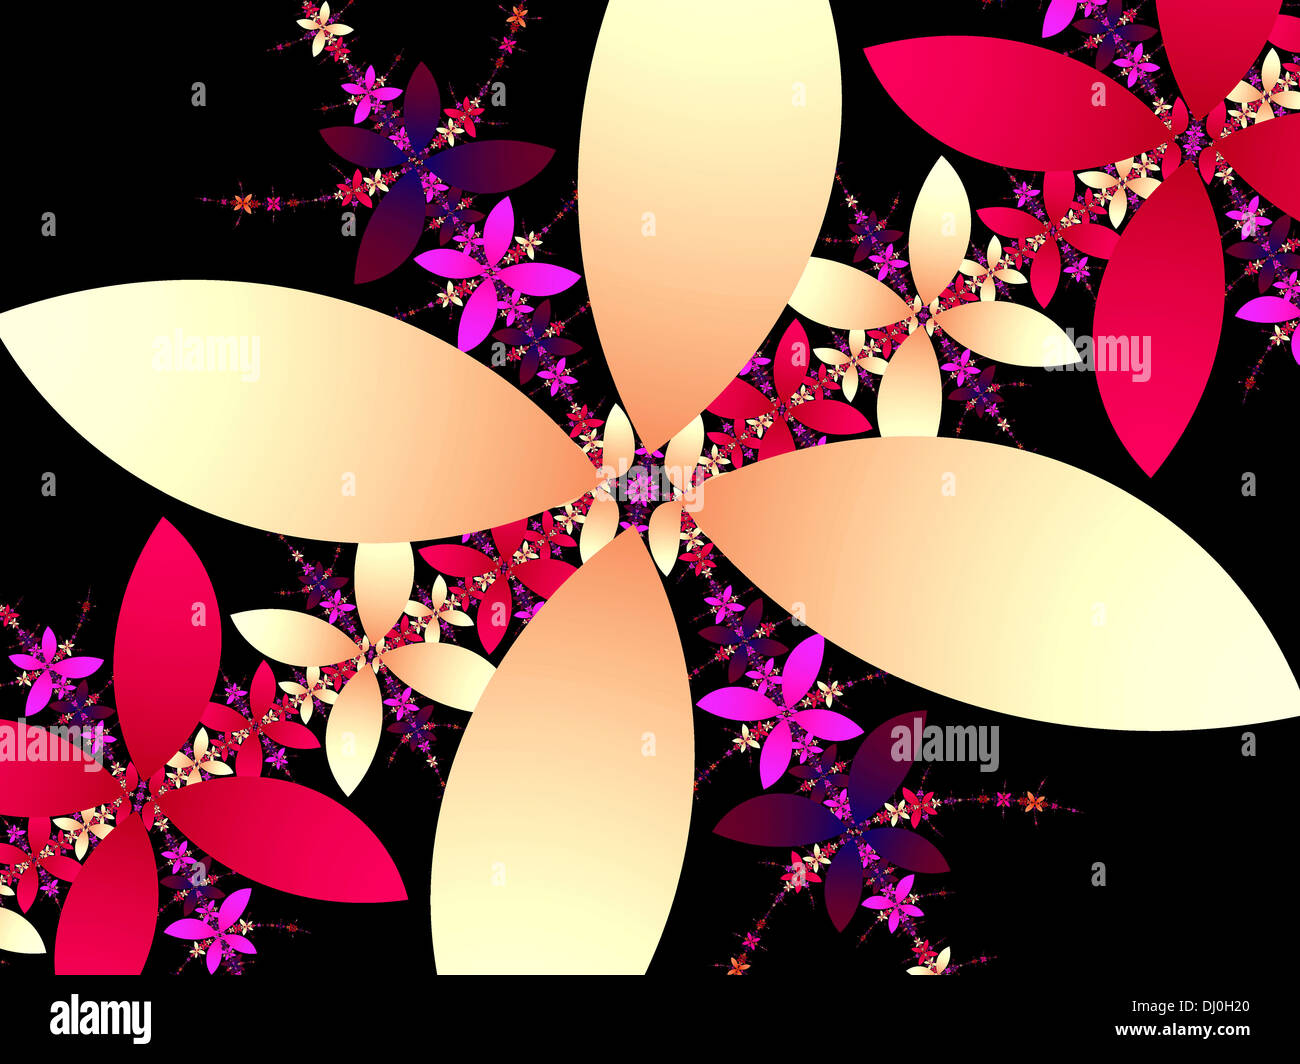 Abstract Illustration Of Flower Petals Stock Photo